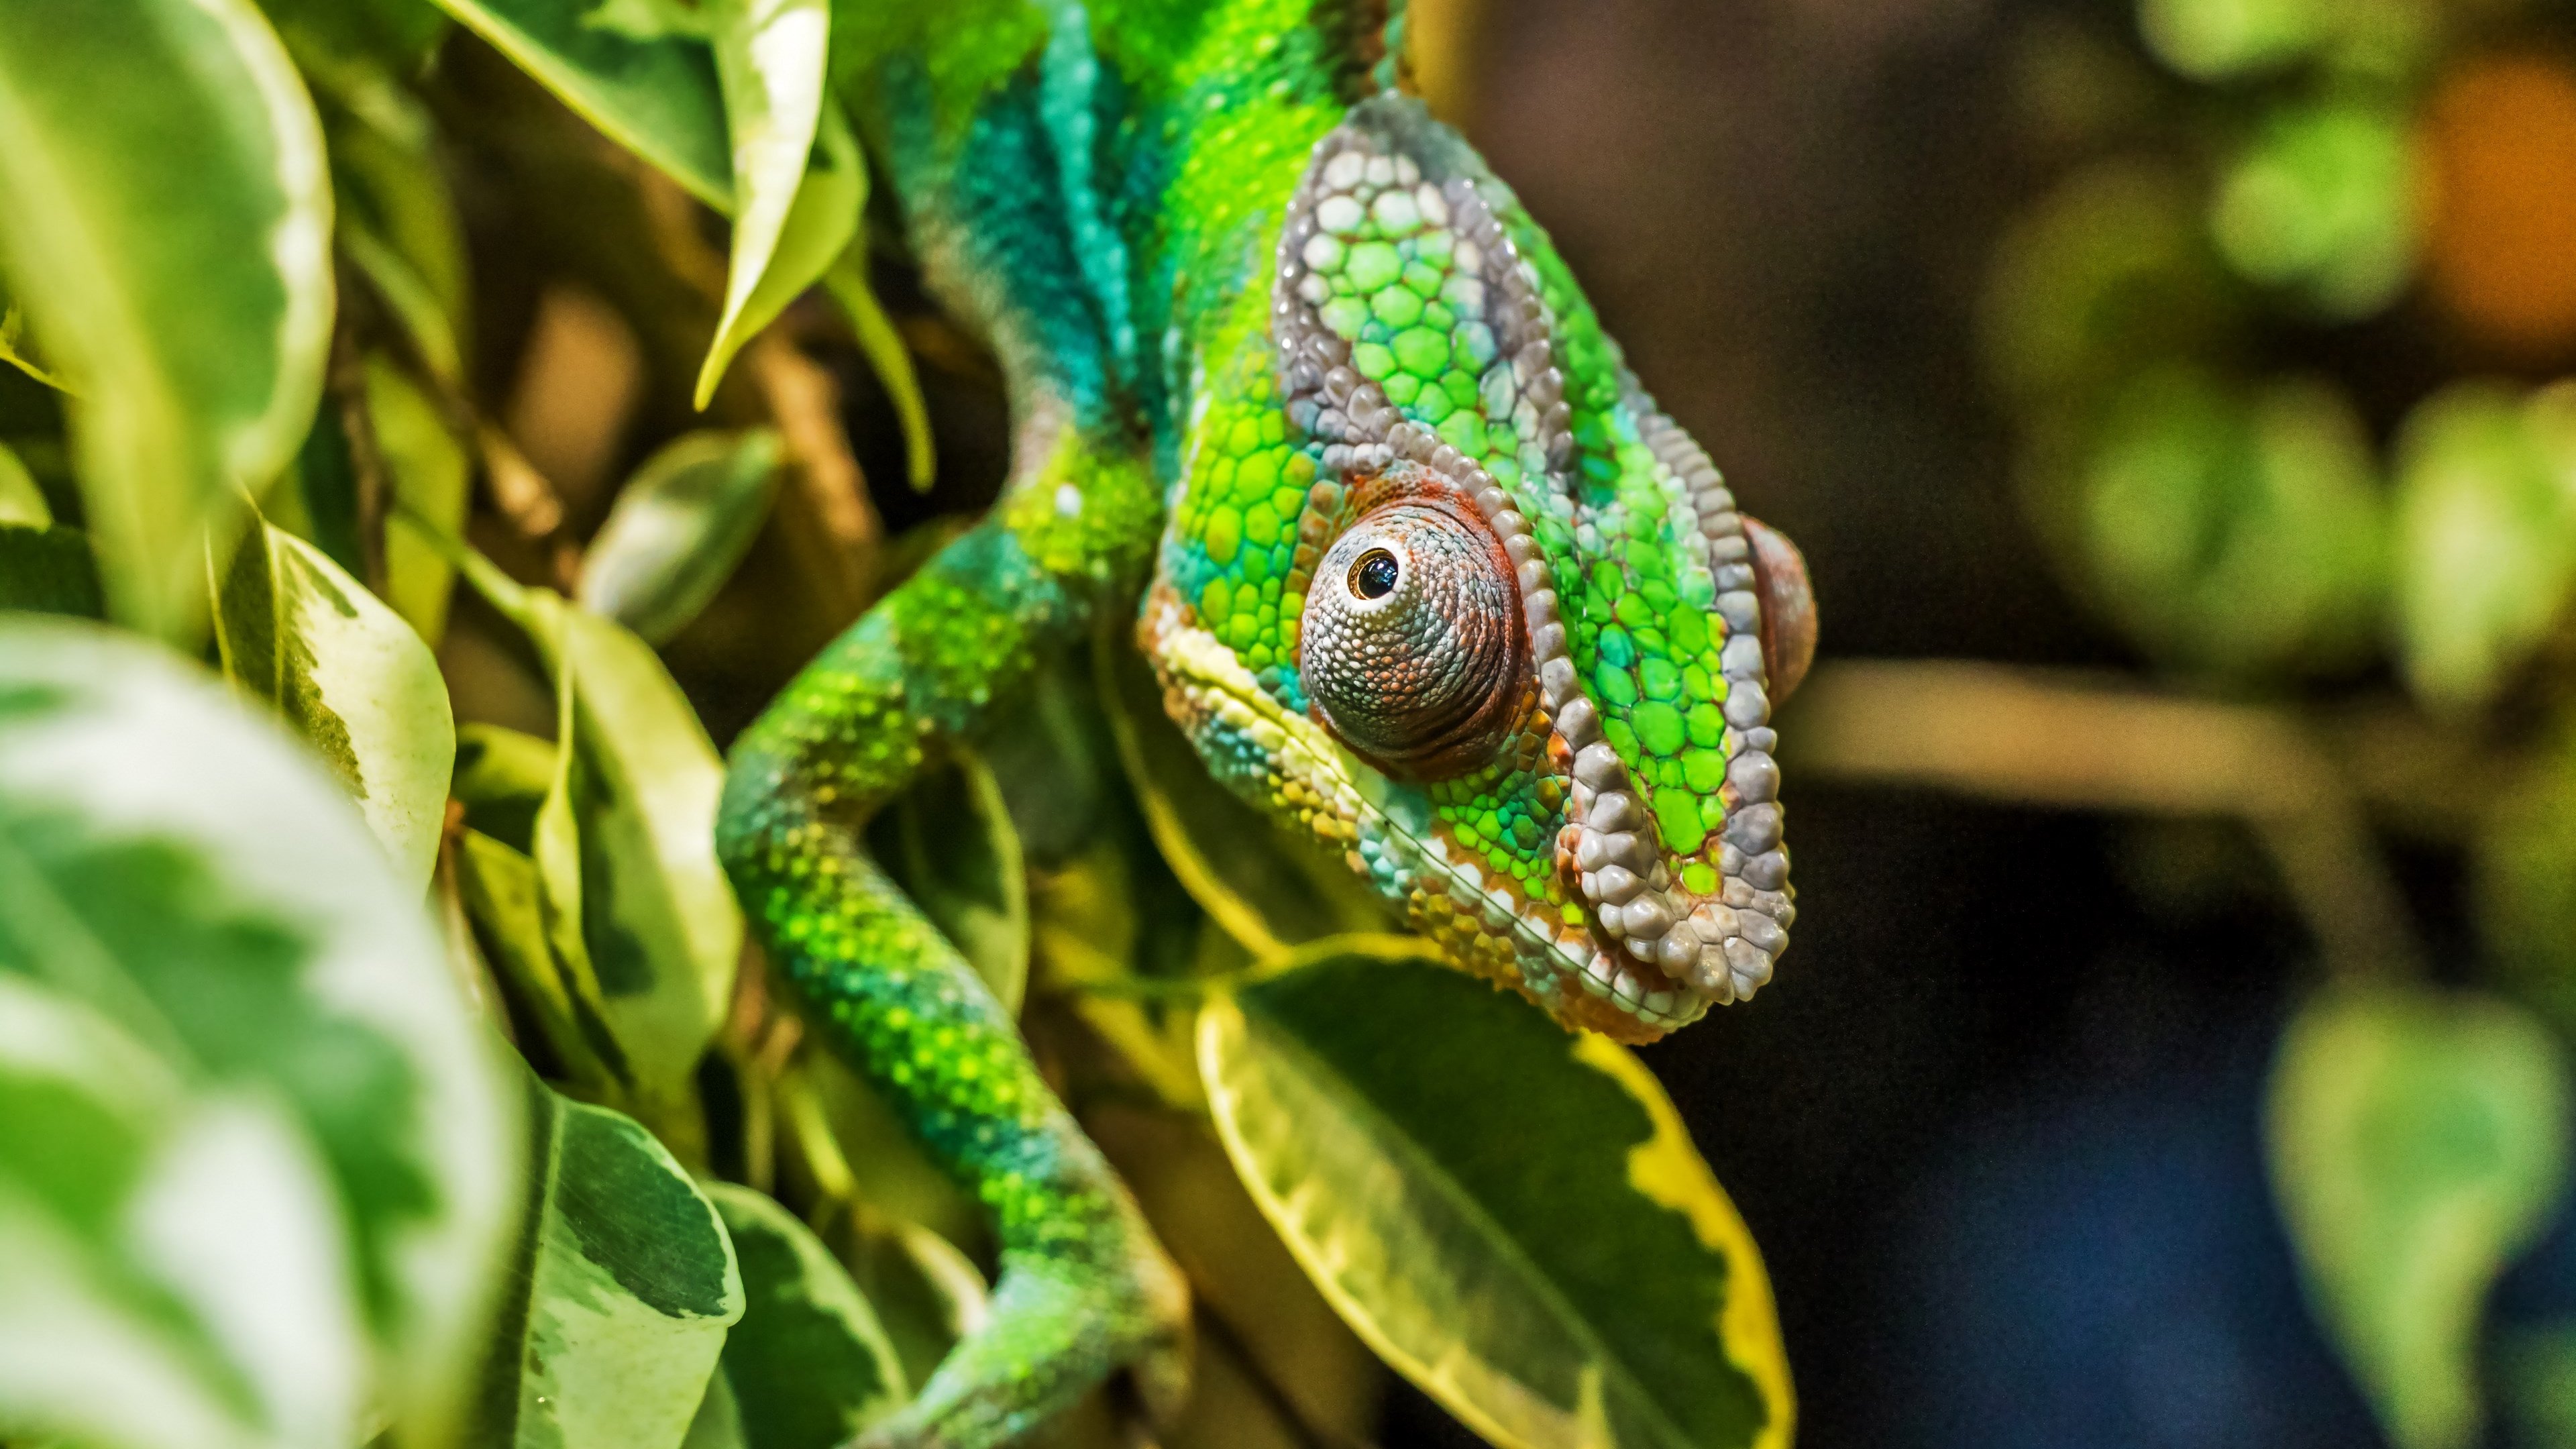 Download wallpaper: Panther chameleon reptile 3840x2160